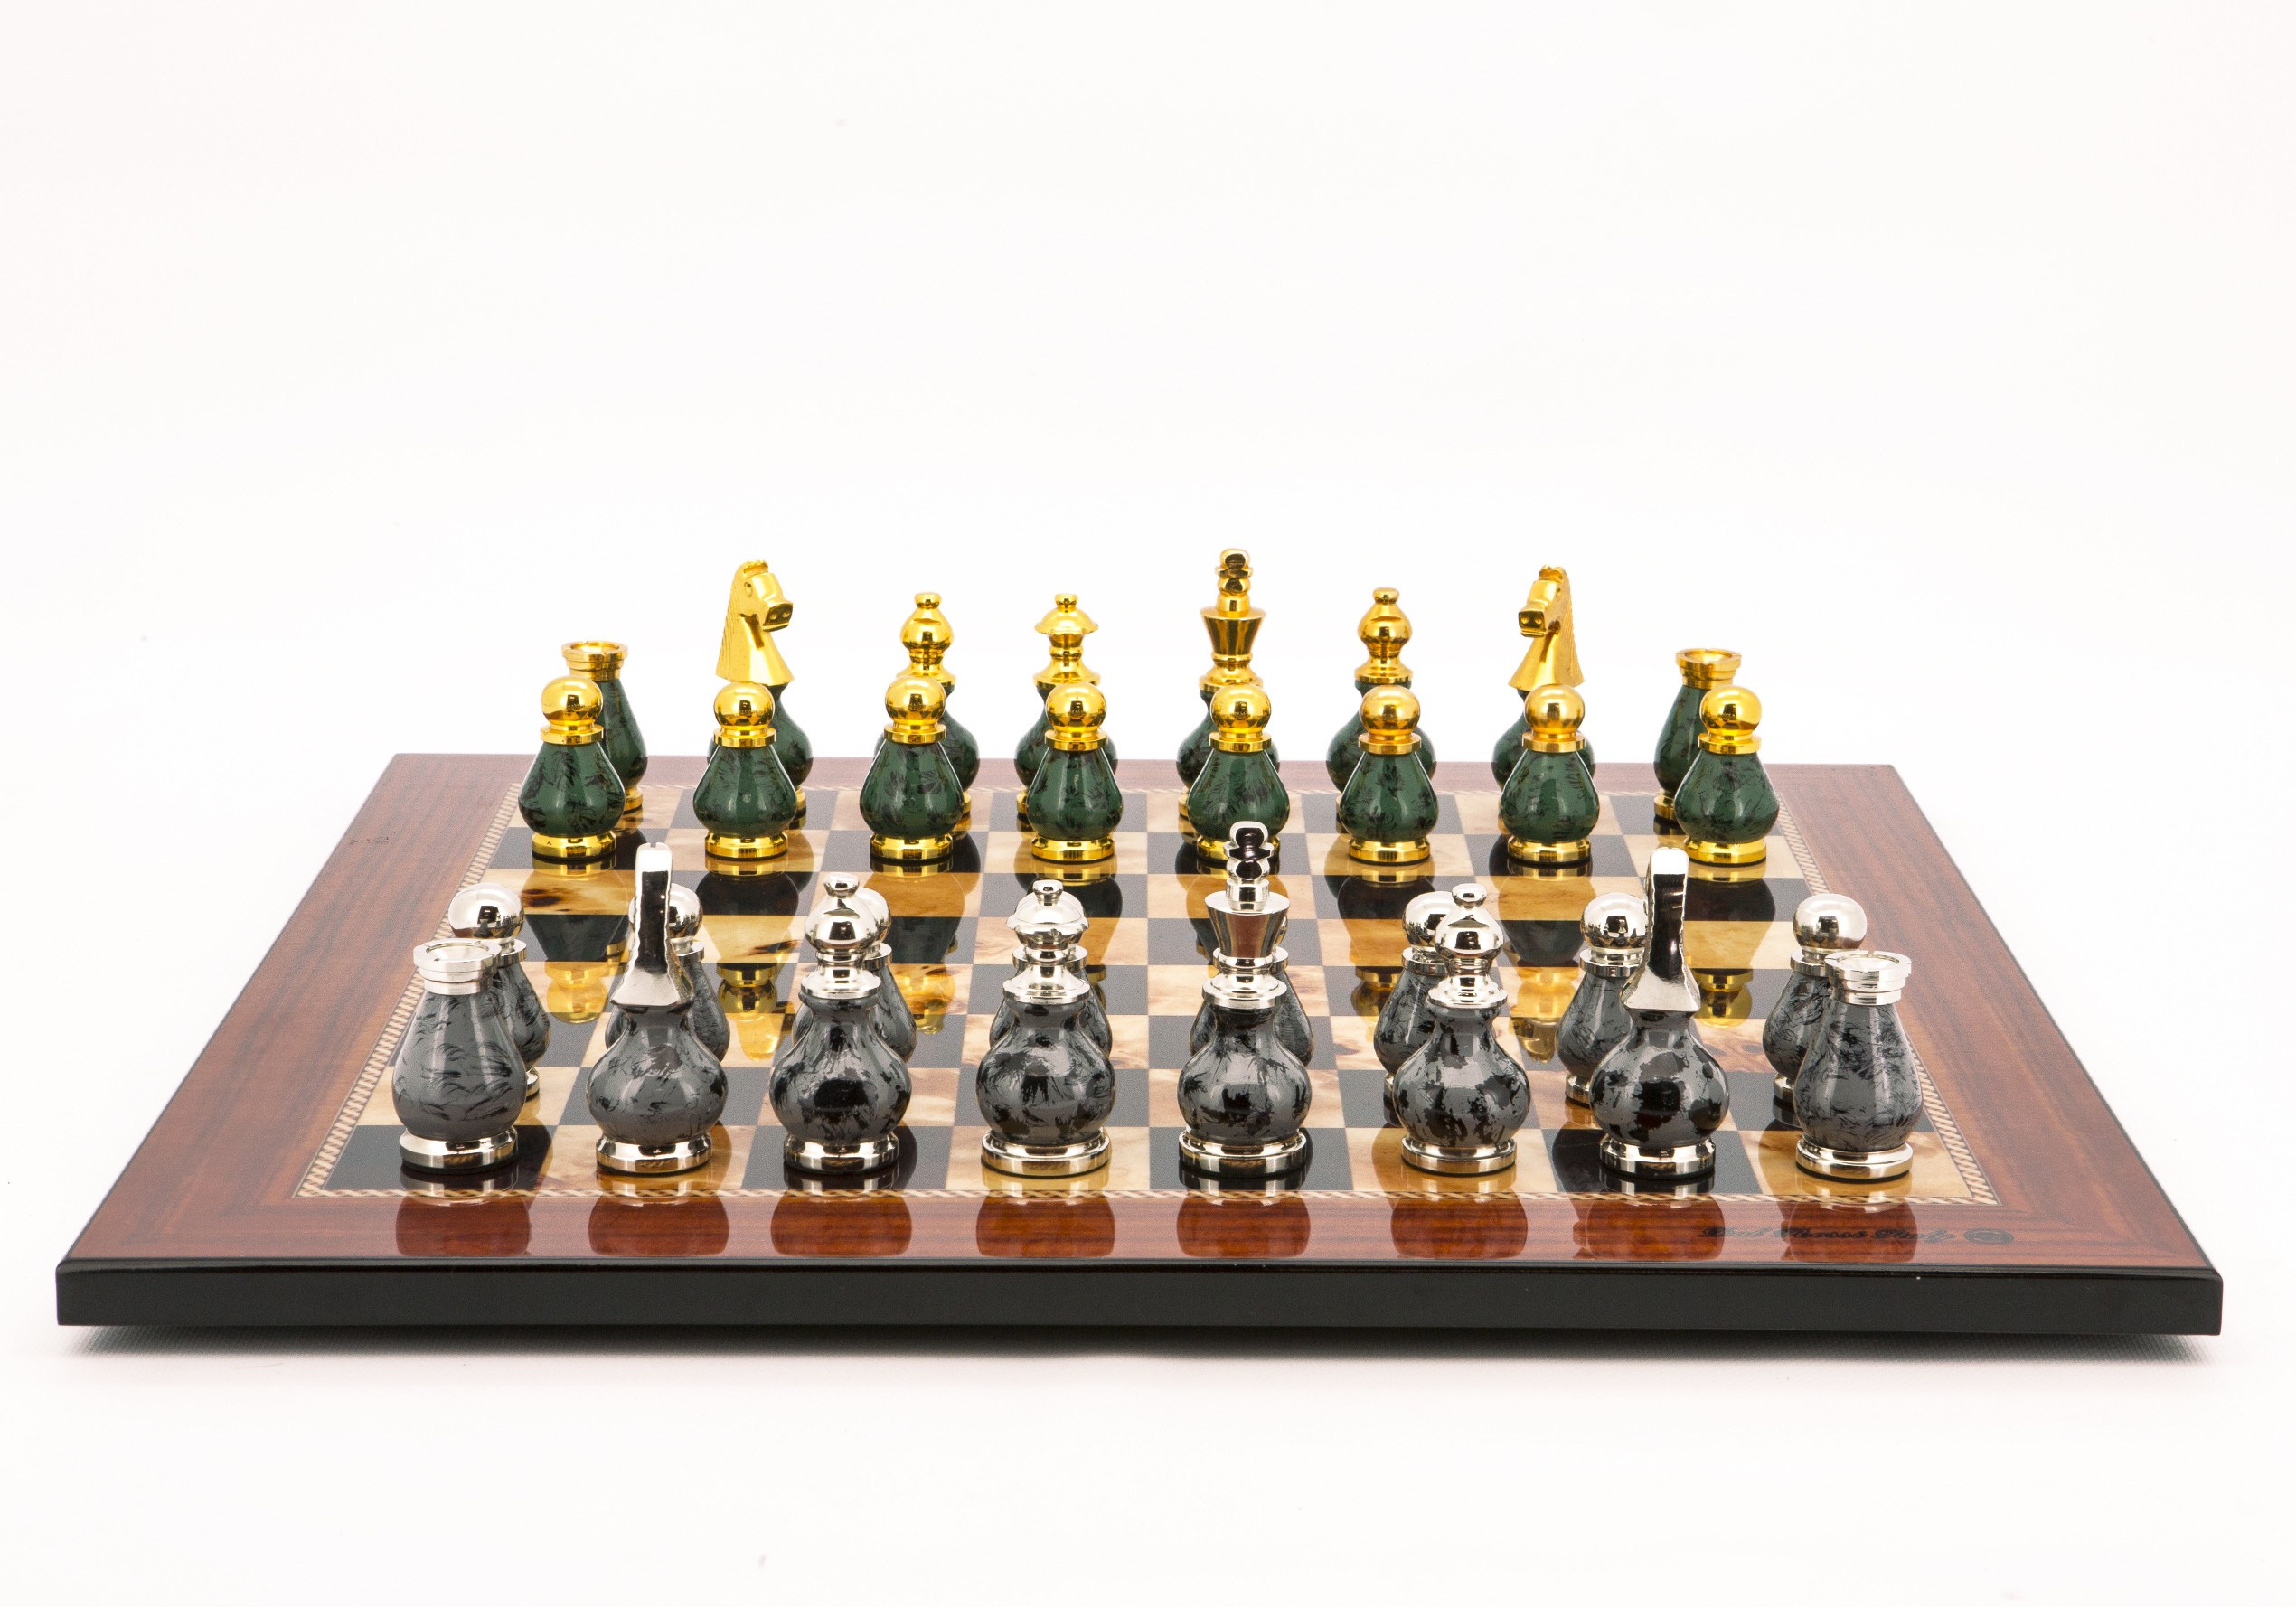 Dal Rossi Italy Chess Set Walnut Finish Flat Board 50cm, With Gray and Green Gold and Silver Metal Tops and Bottoms Chess Pieces 90mm